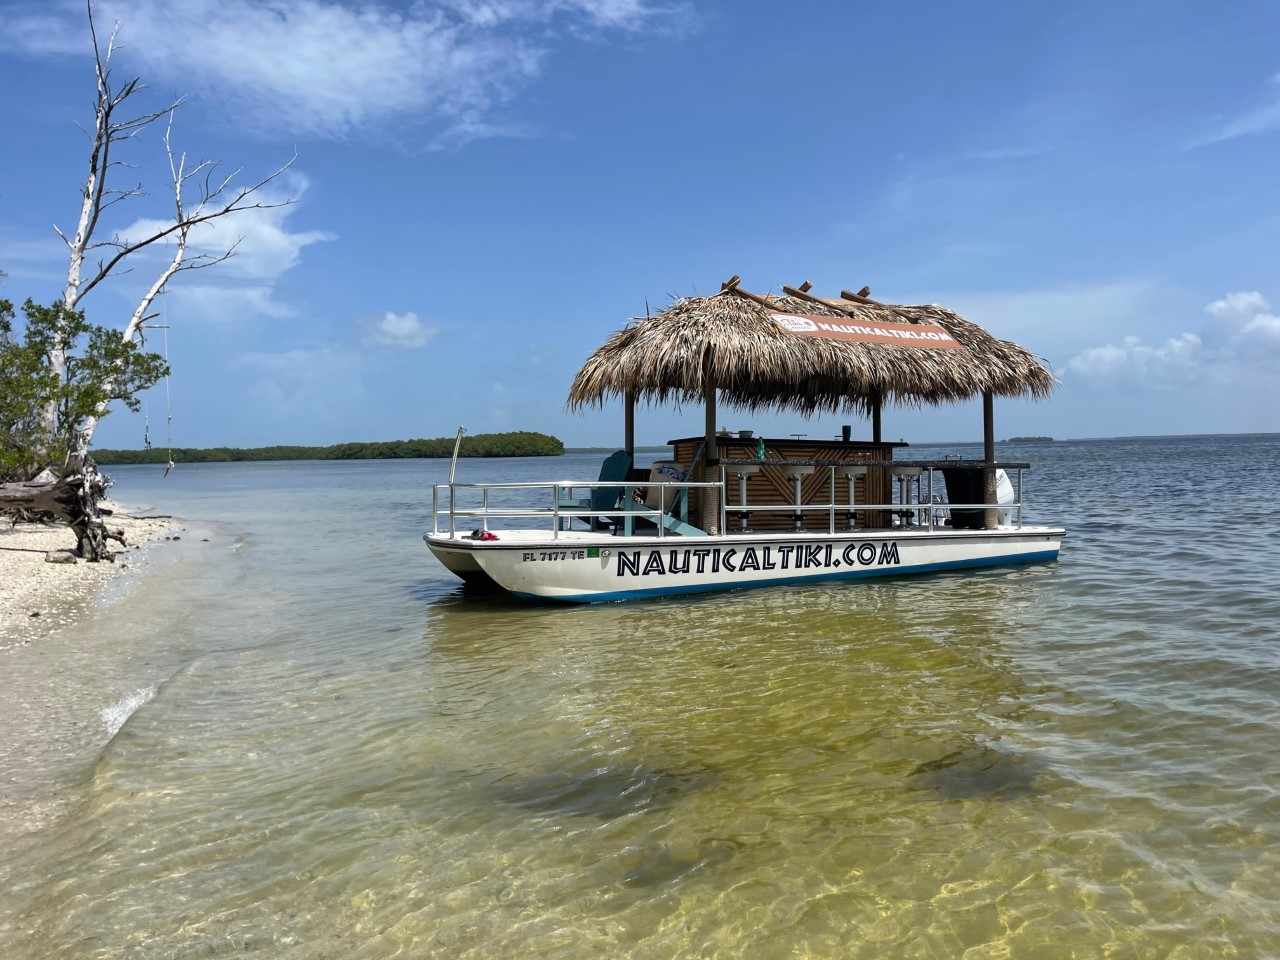 Nautical Tiki has a catamaran hull for a smooth and stable ride. It also provides easy on and off boarding on beaches.